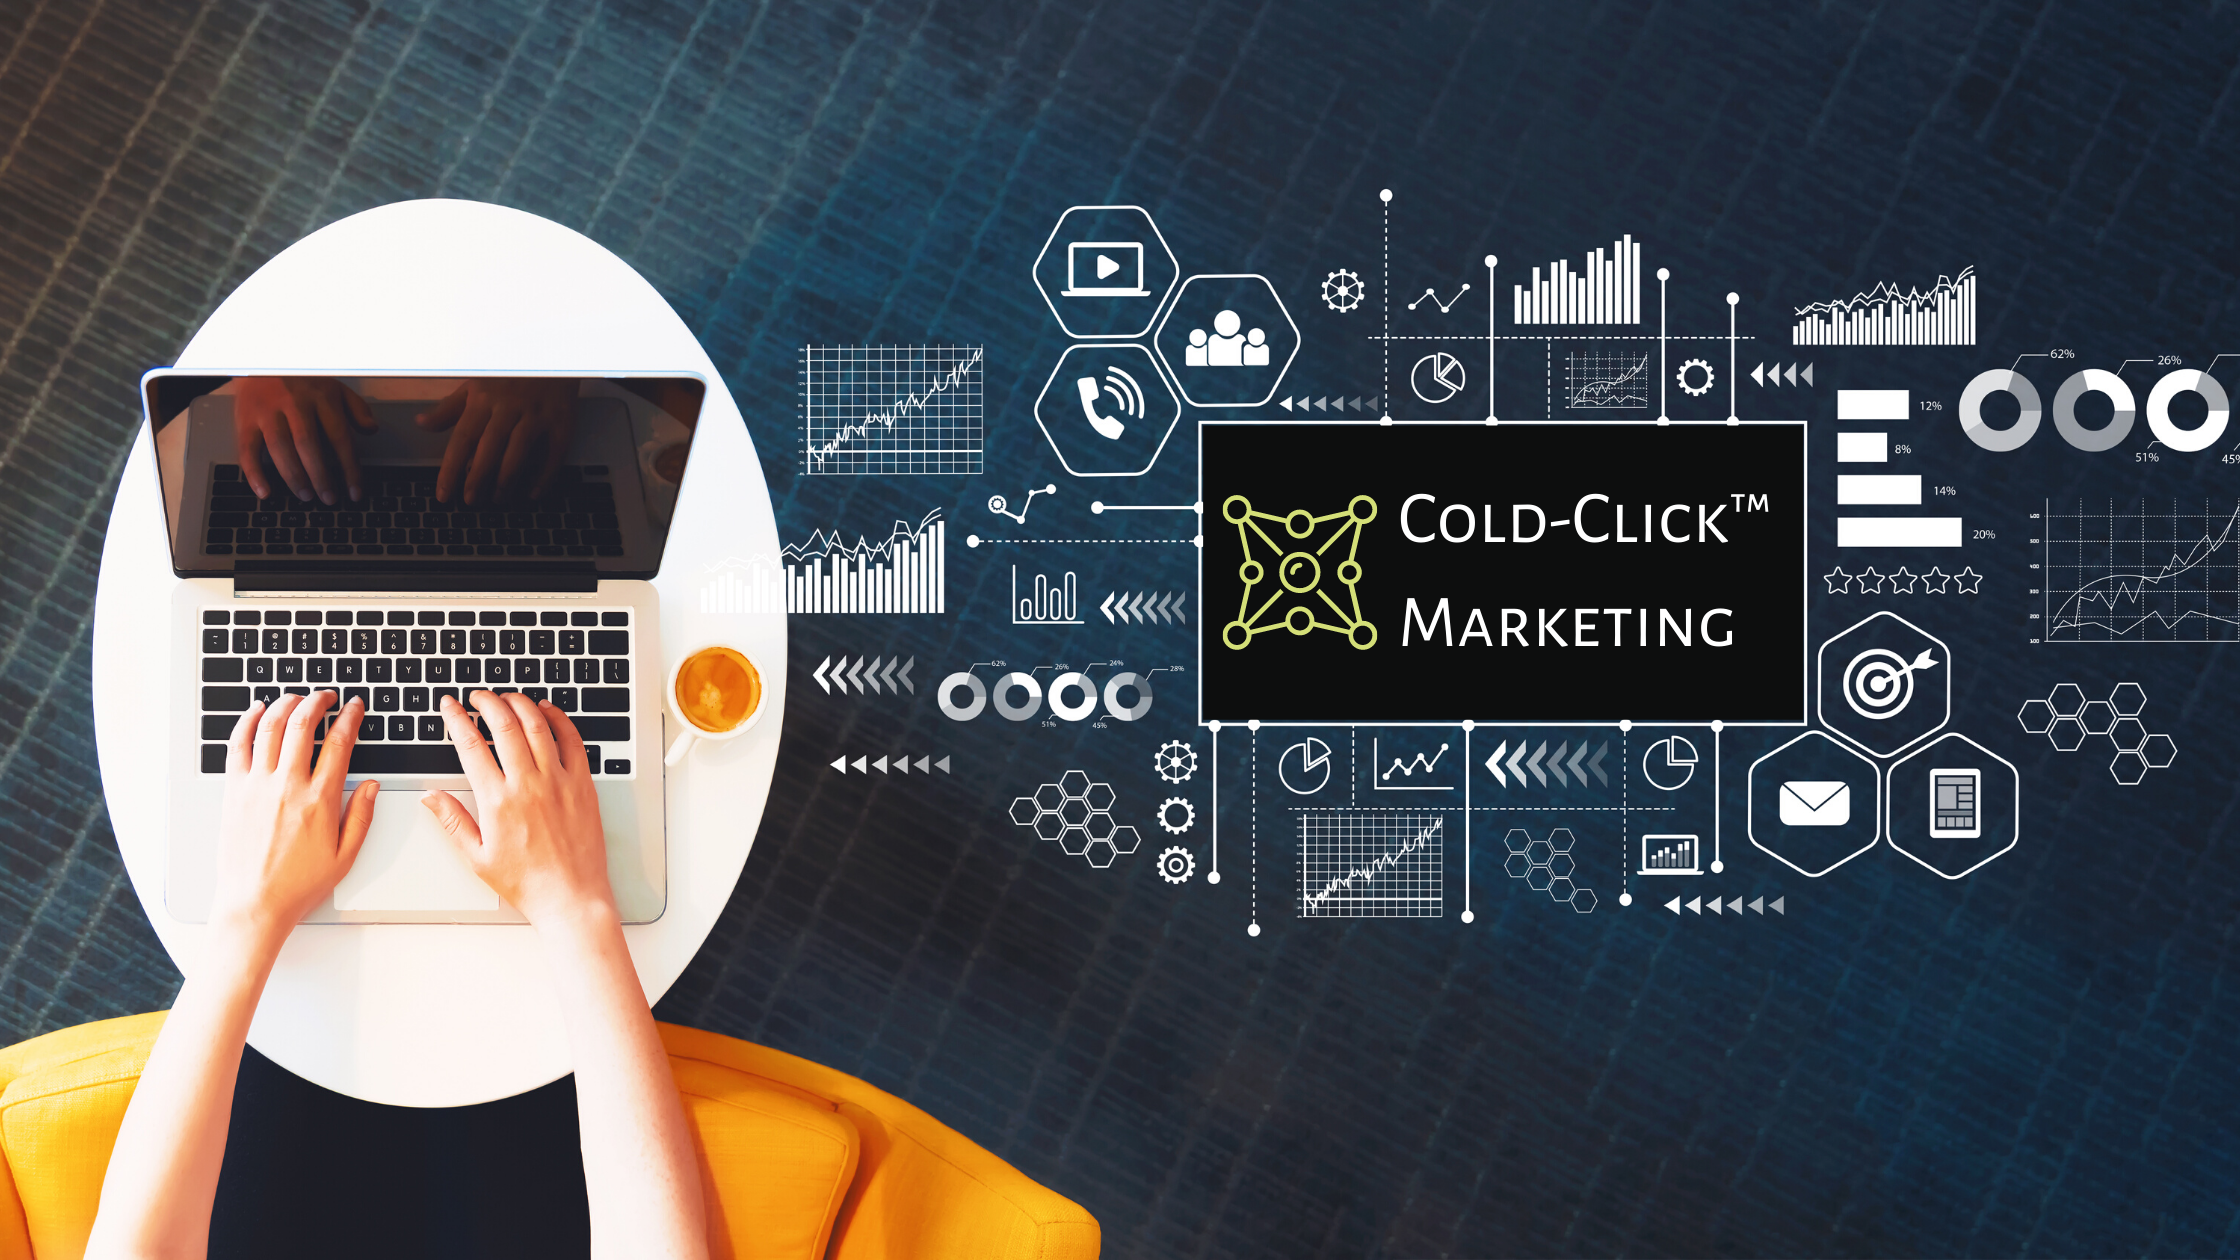 Cold-Click, cold-click marketing, in-link advisors, social media marketing, linkedin marketing, new clients, prospecting, how to close business